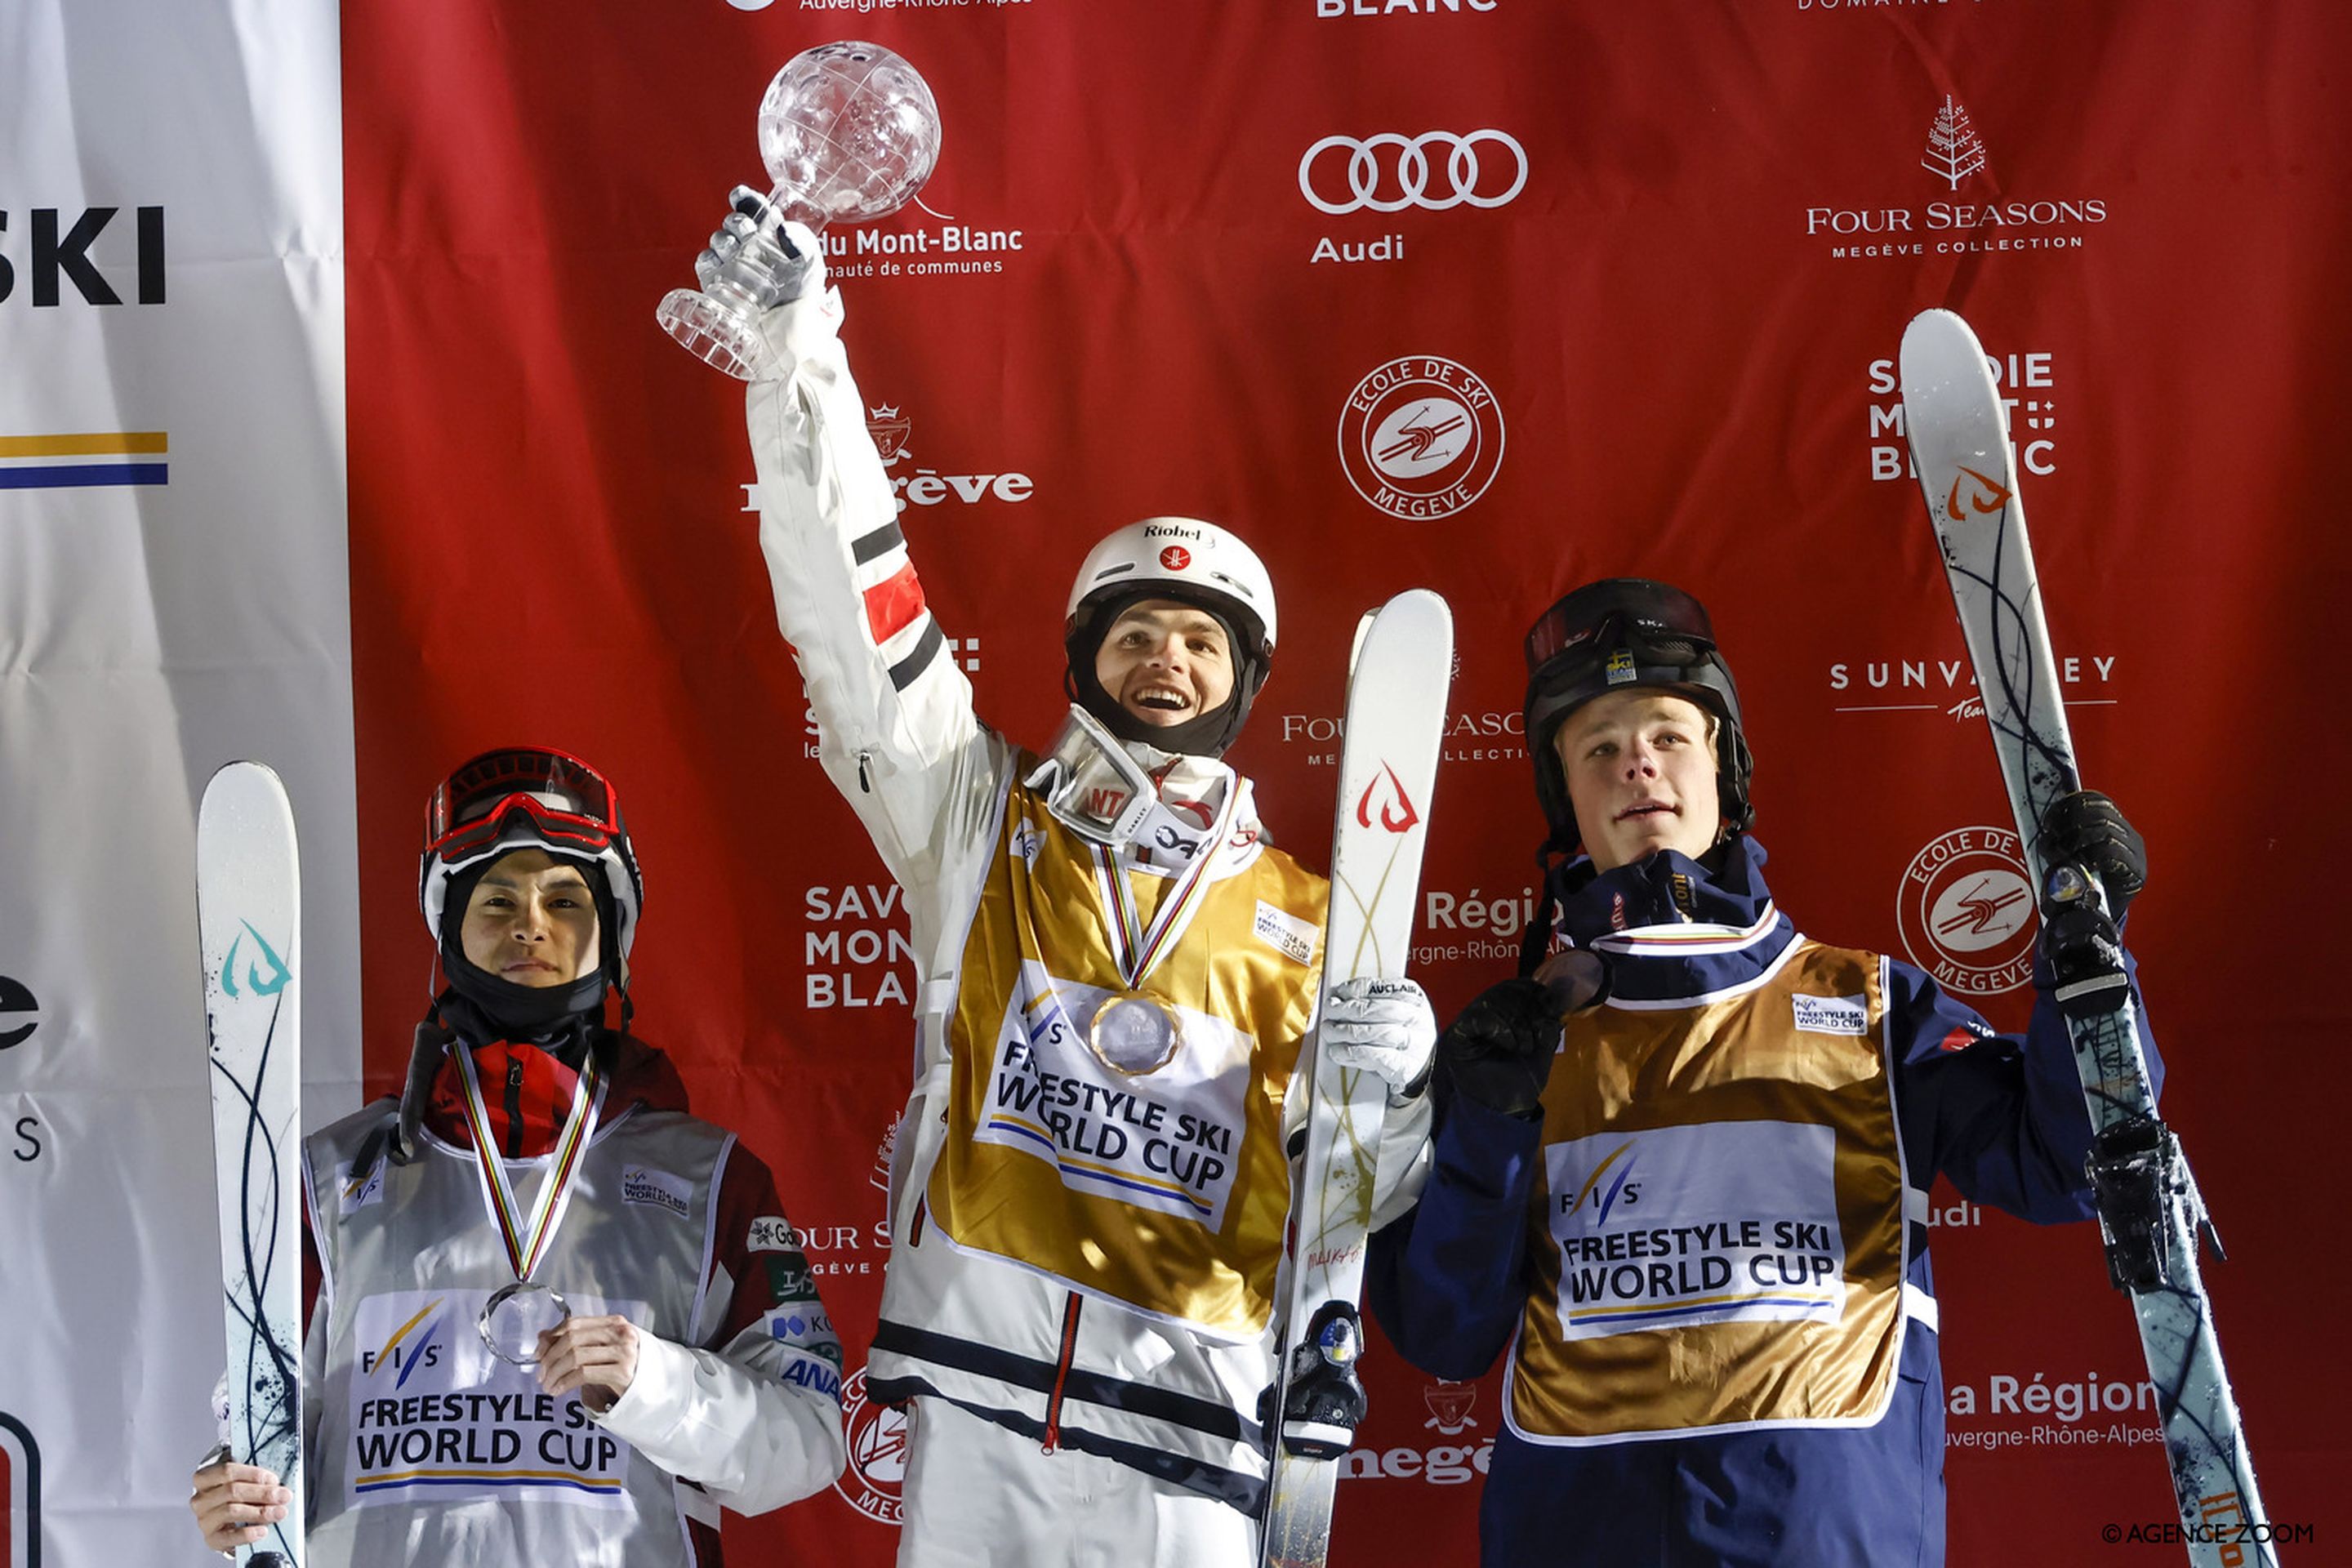 MEGEVE, FRANCE - MARCH 18: Mikael Kingsbury of Team Canada wins the globe in the moguls standings during the FIS Freestyle Ski World Cup Men's and Women's Moguls on March 18, 2022 in Megeve, France. (Photo by Alexis Boichard/Agence Zoom)